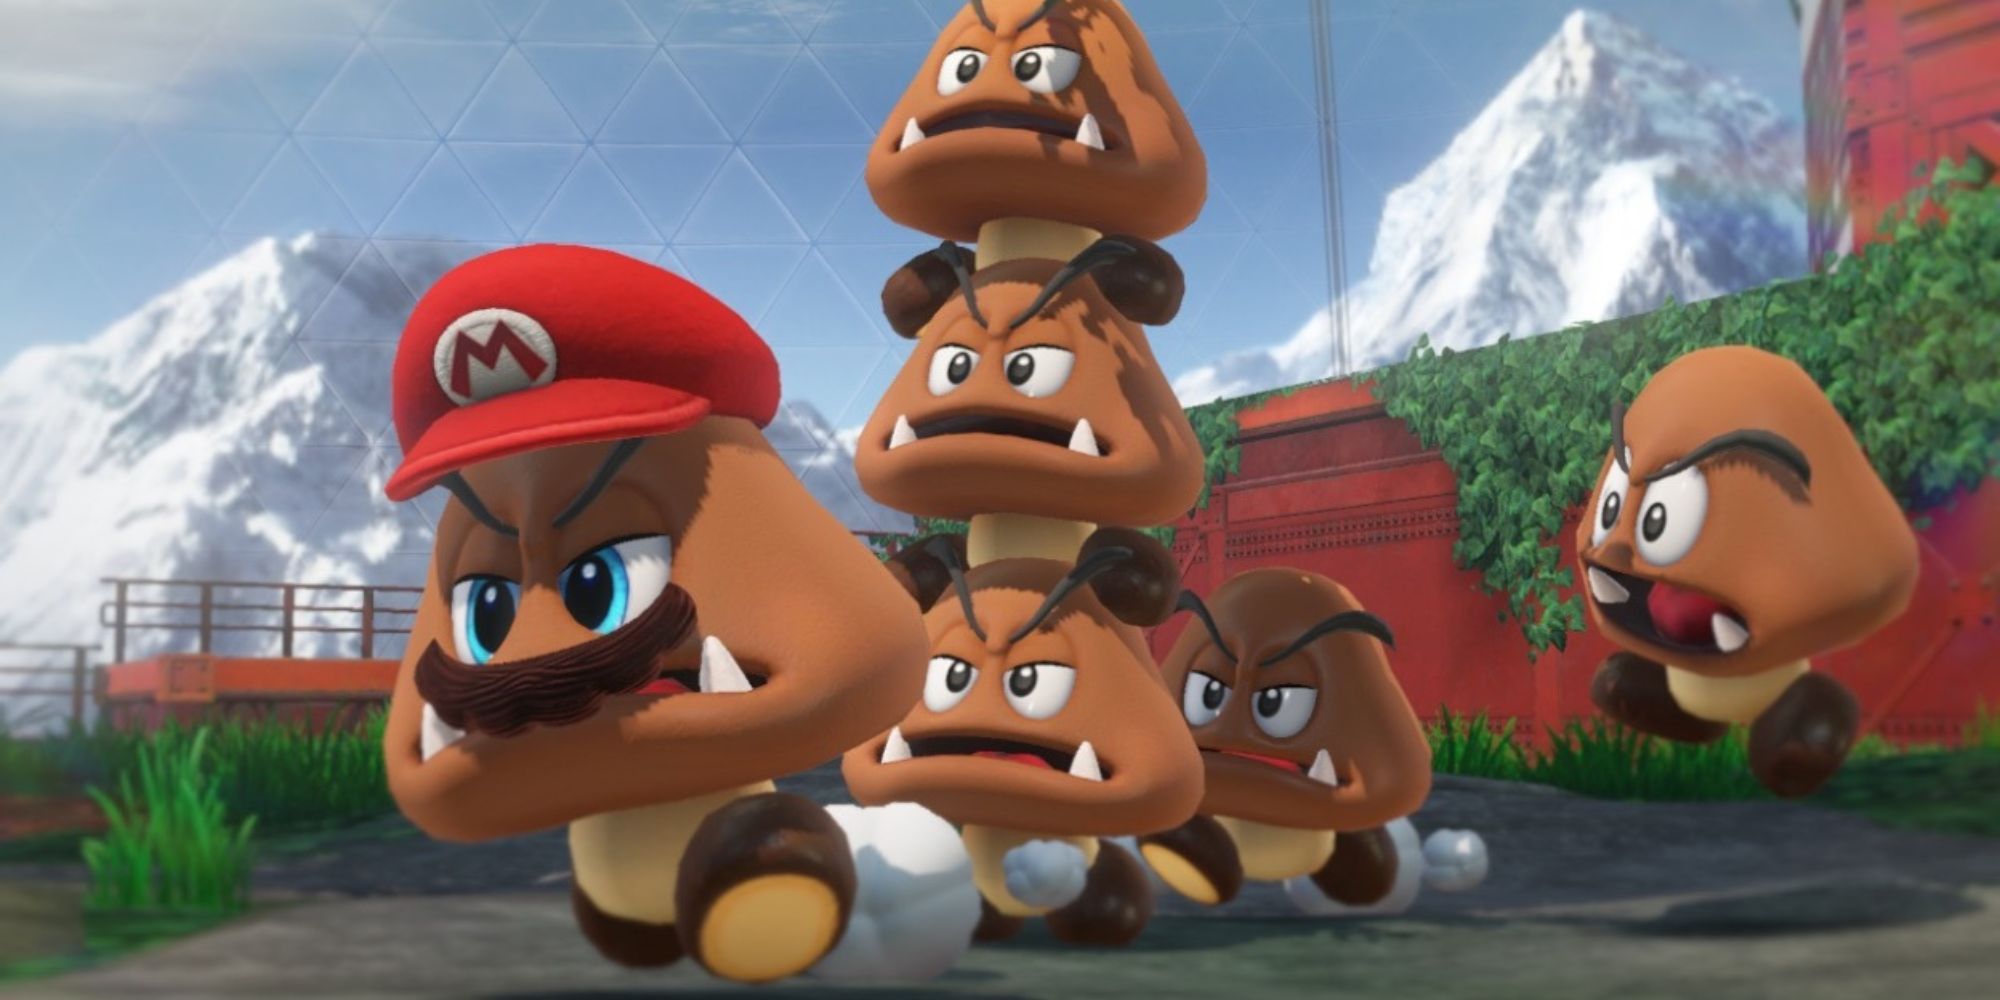 Goomba Mario runs away from other Goombas at Steam Gardens in Super Mario Odyssey